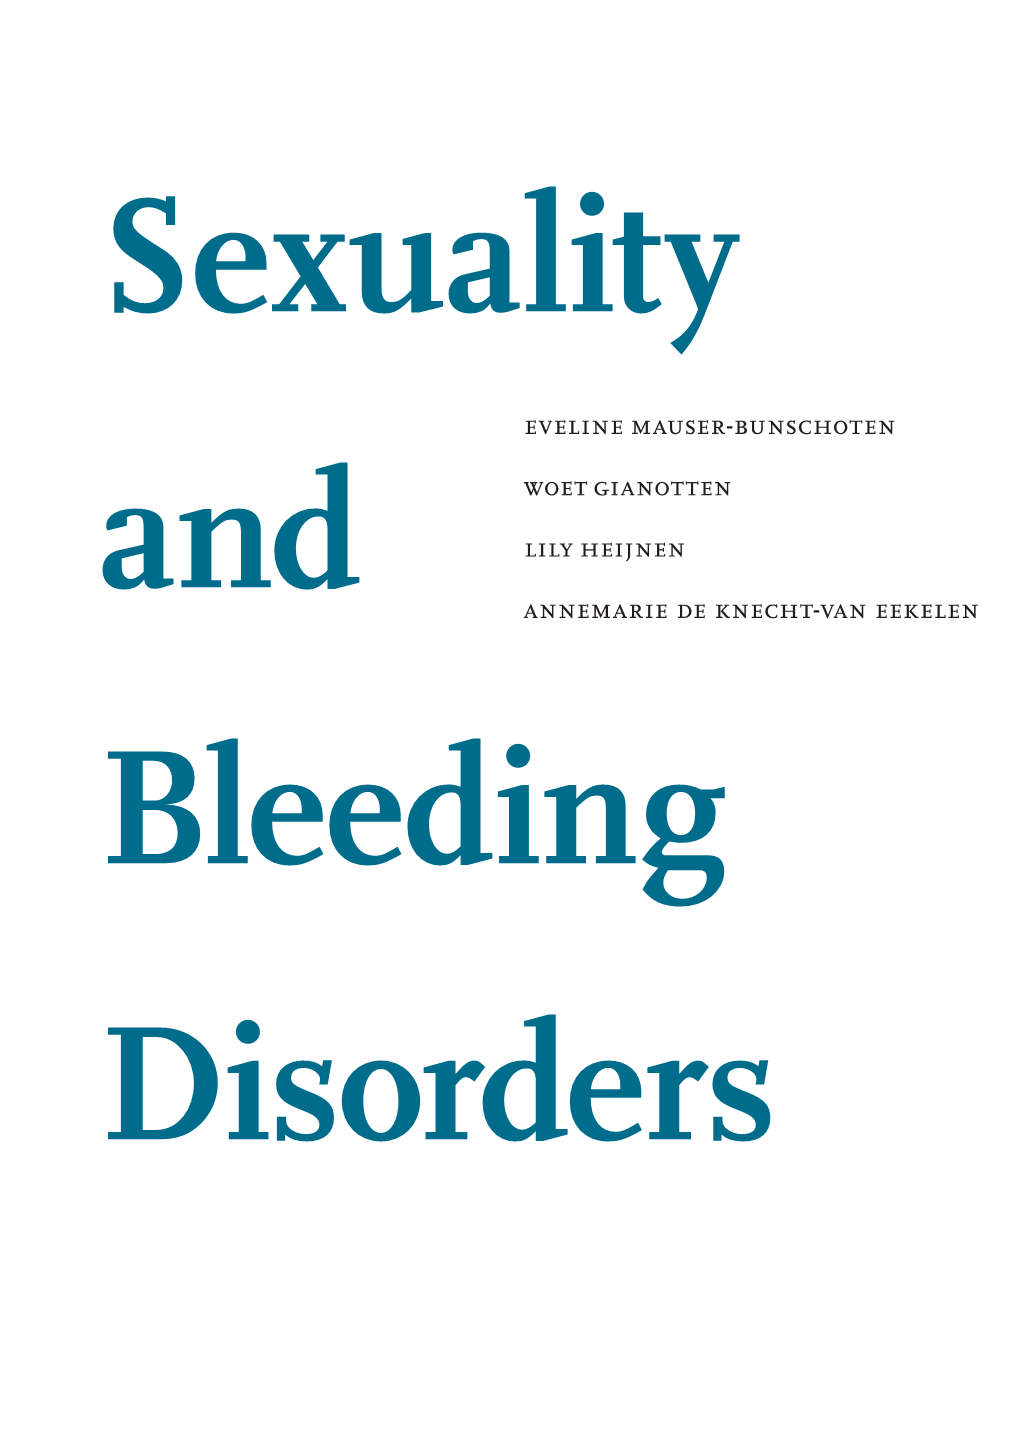 Sexuality and Bleeding Disorders Series: Haemophilia Care and Treatment